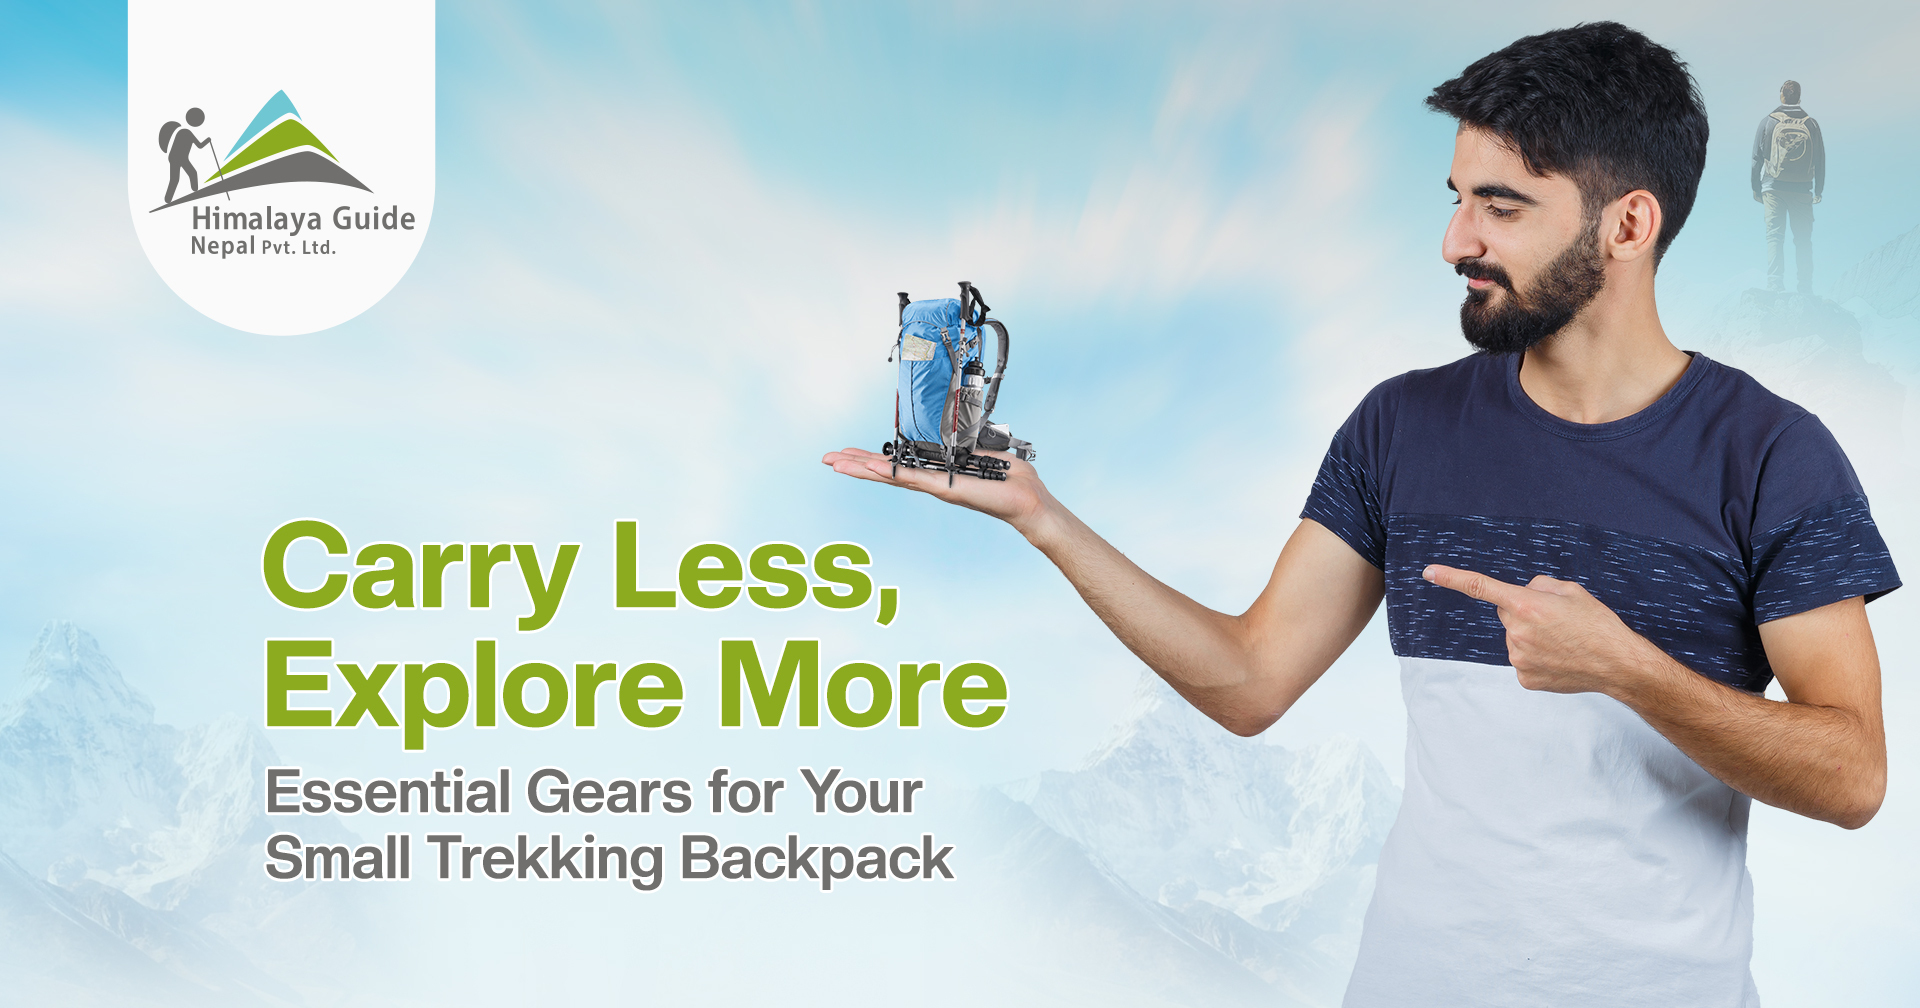 Carry Less, Explore More: Essential Gear for Your Small Trekking Backpack